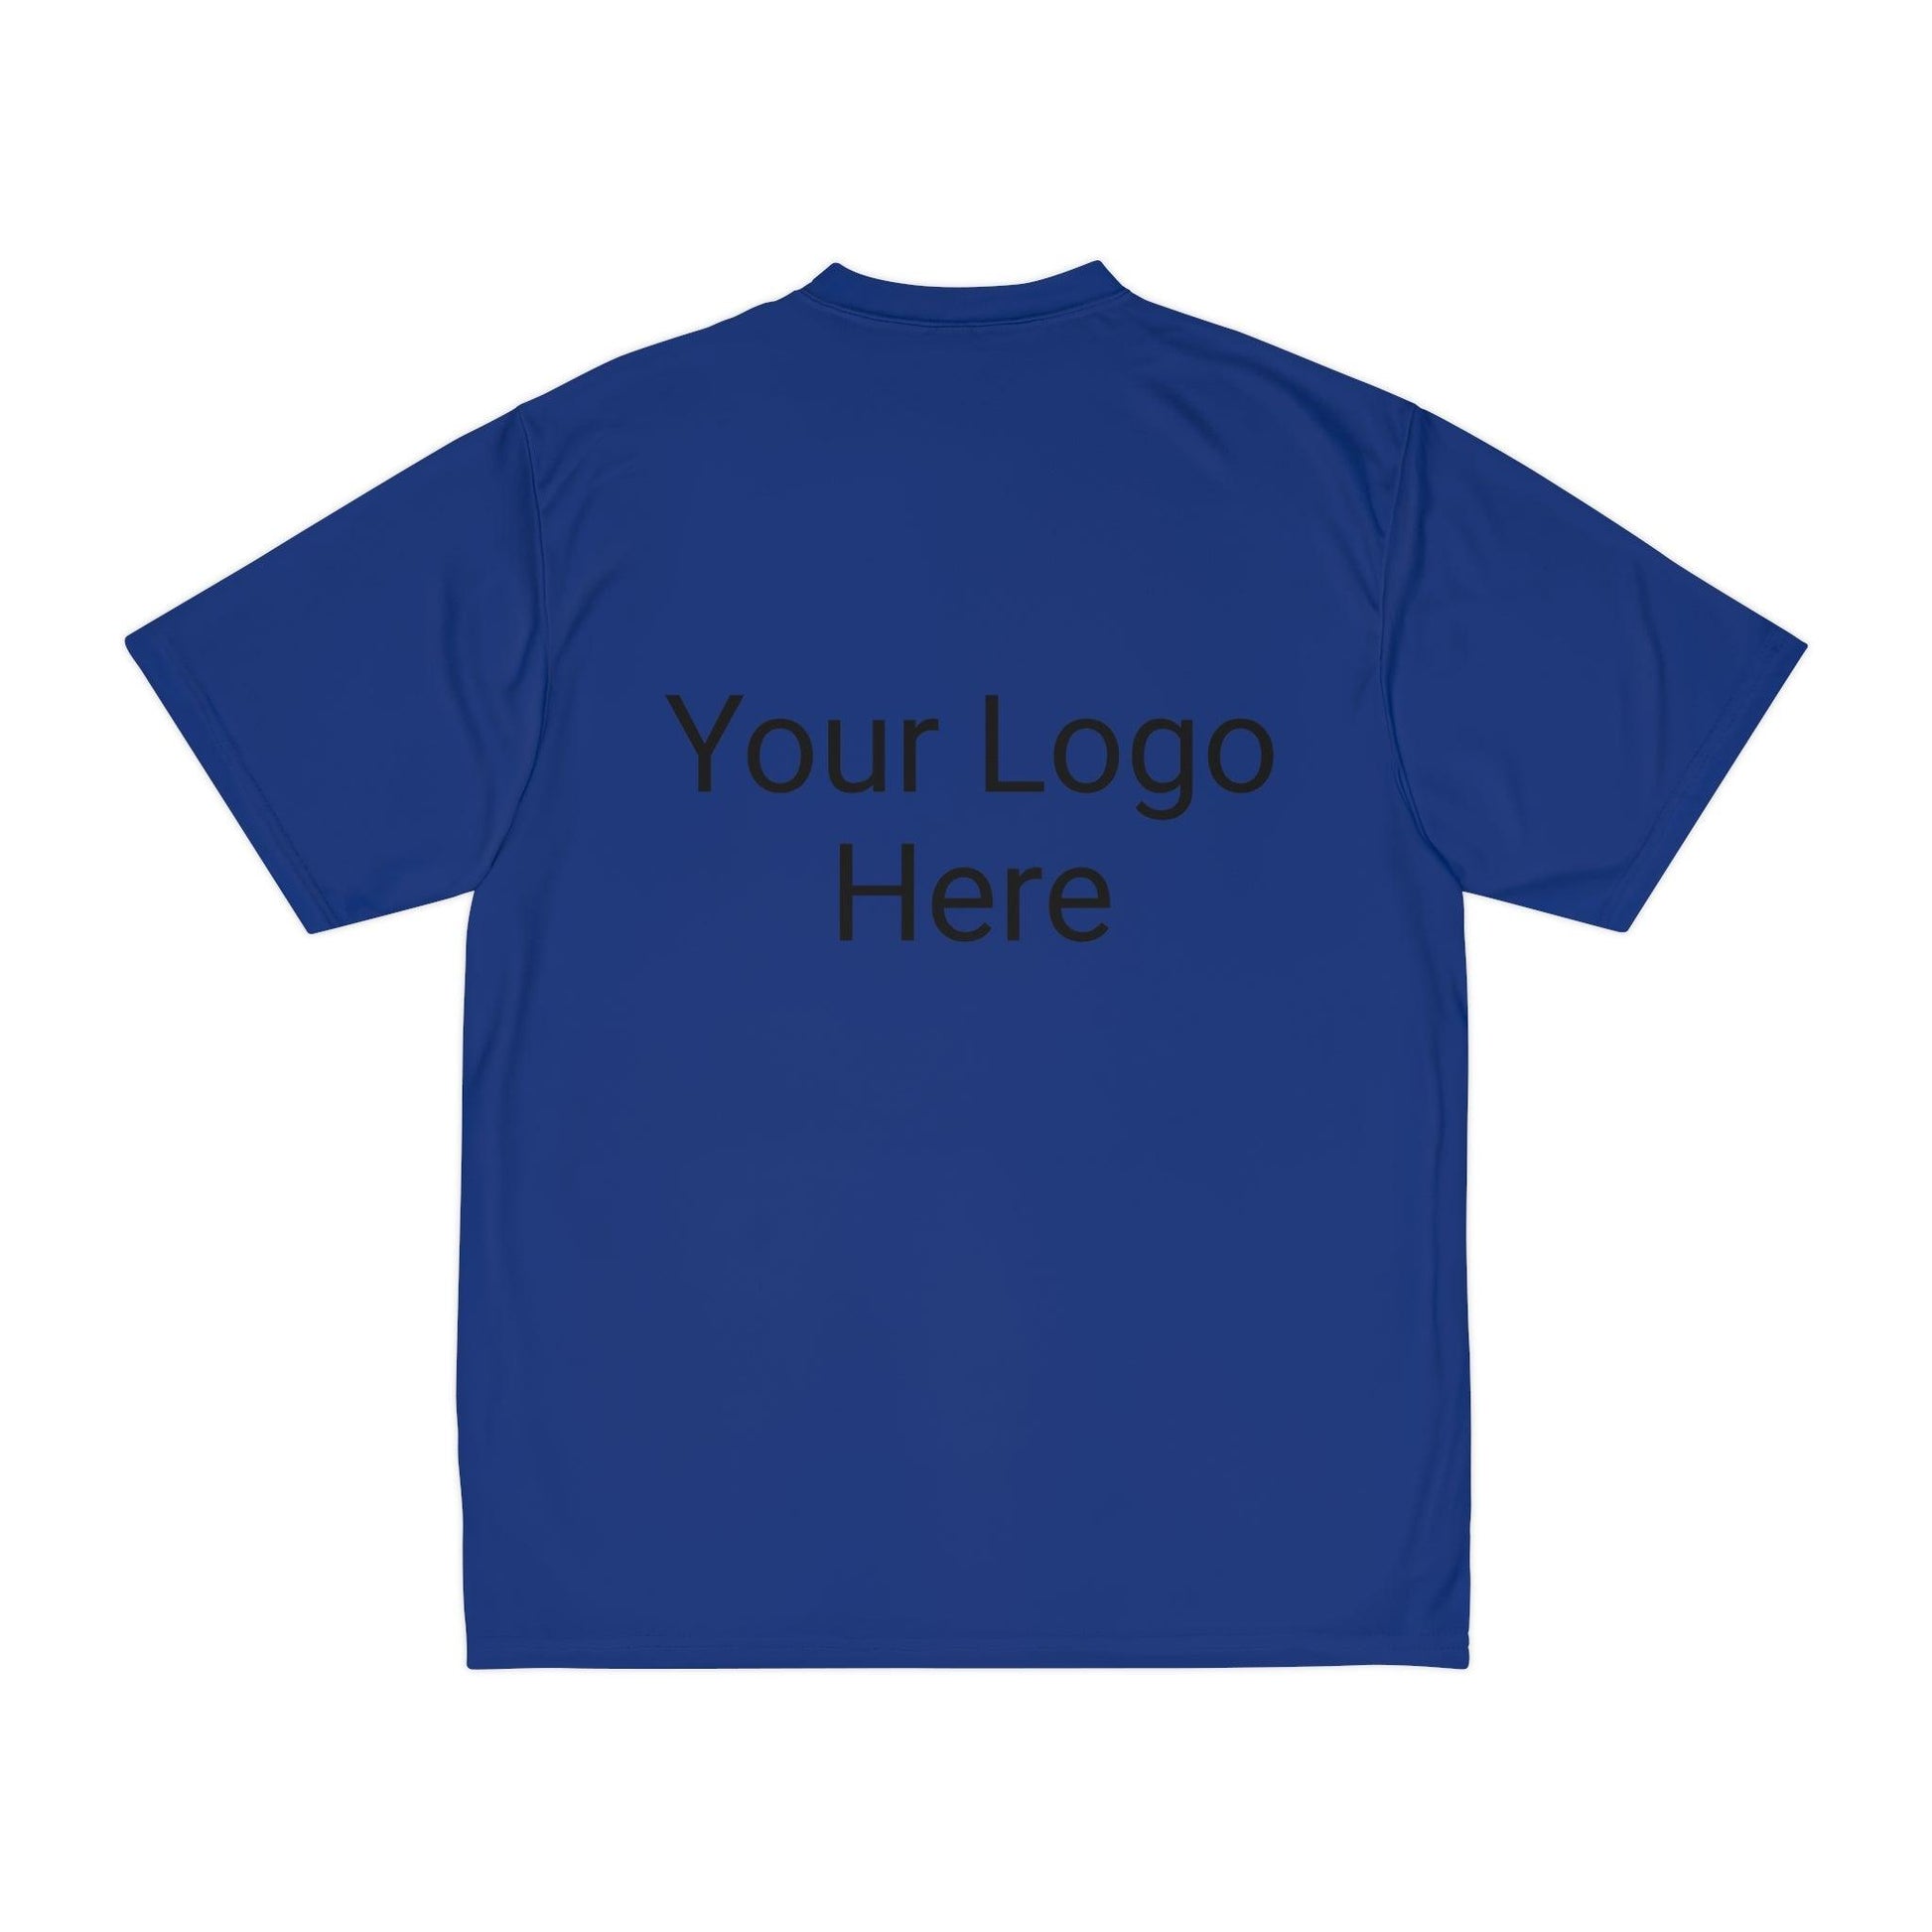 CuStom Double Sided Men's Performance T-Shirt Team Sports And Fans